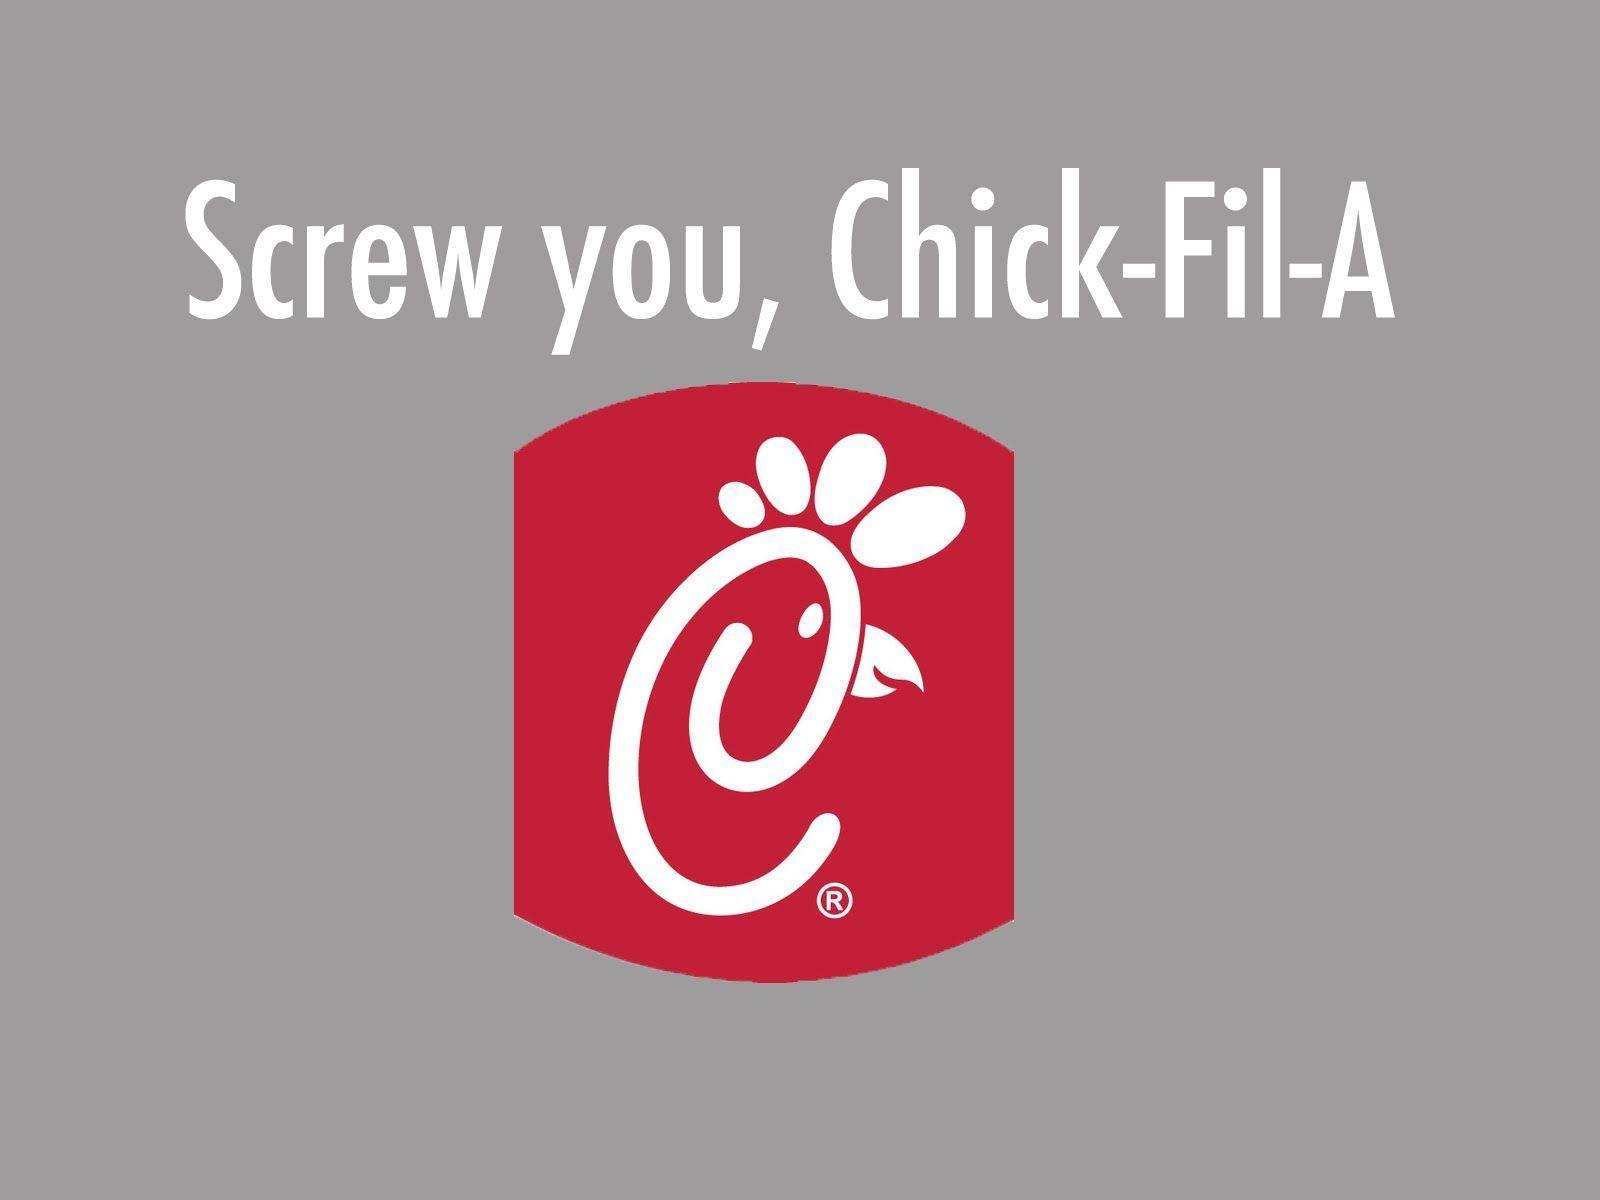 Screw You, Chick